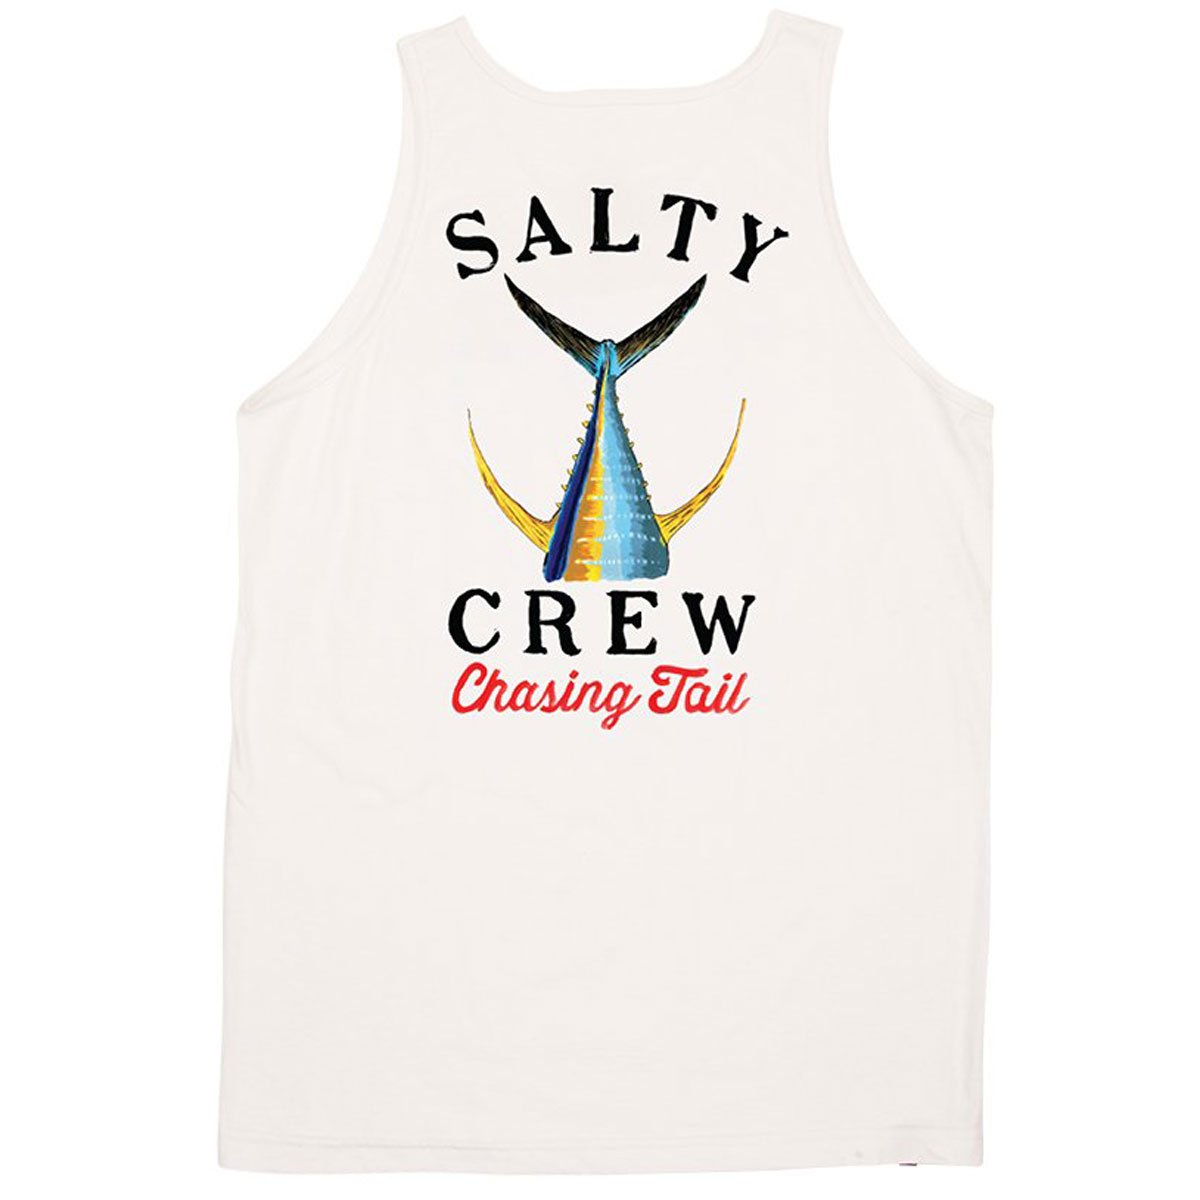 Salty Crew Tailed Tank Top - White image 2